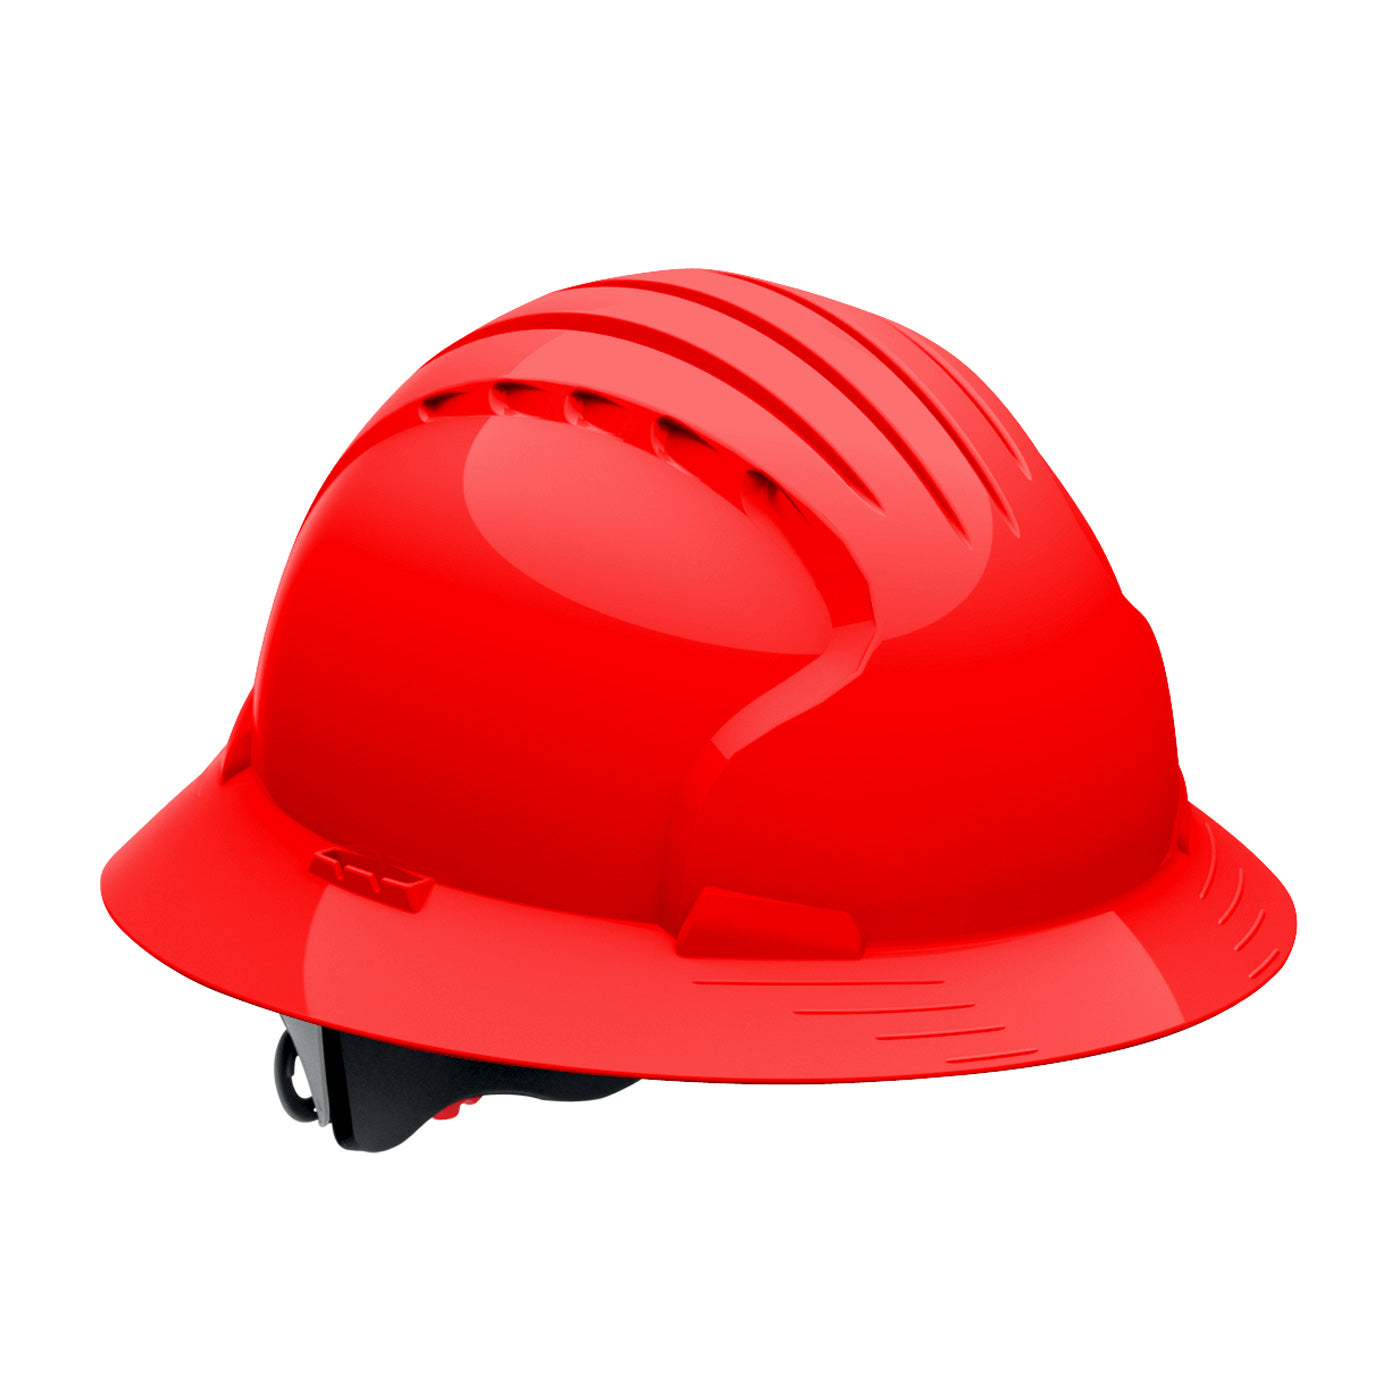 Protective Industrial Products-EVOLUTION™ DELUXE 6161 FULL BRIM HARD HAT (NON VENTED)-eSafety Supplies, Inc